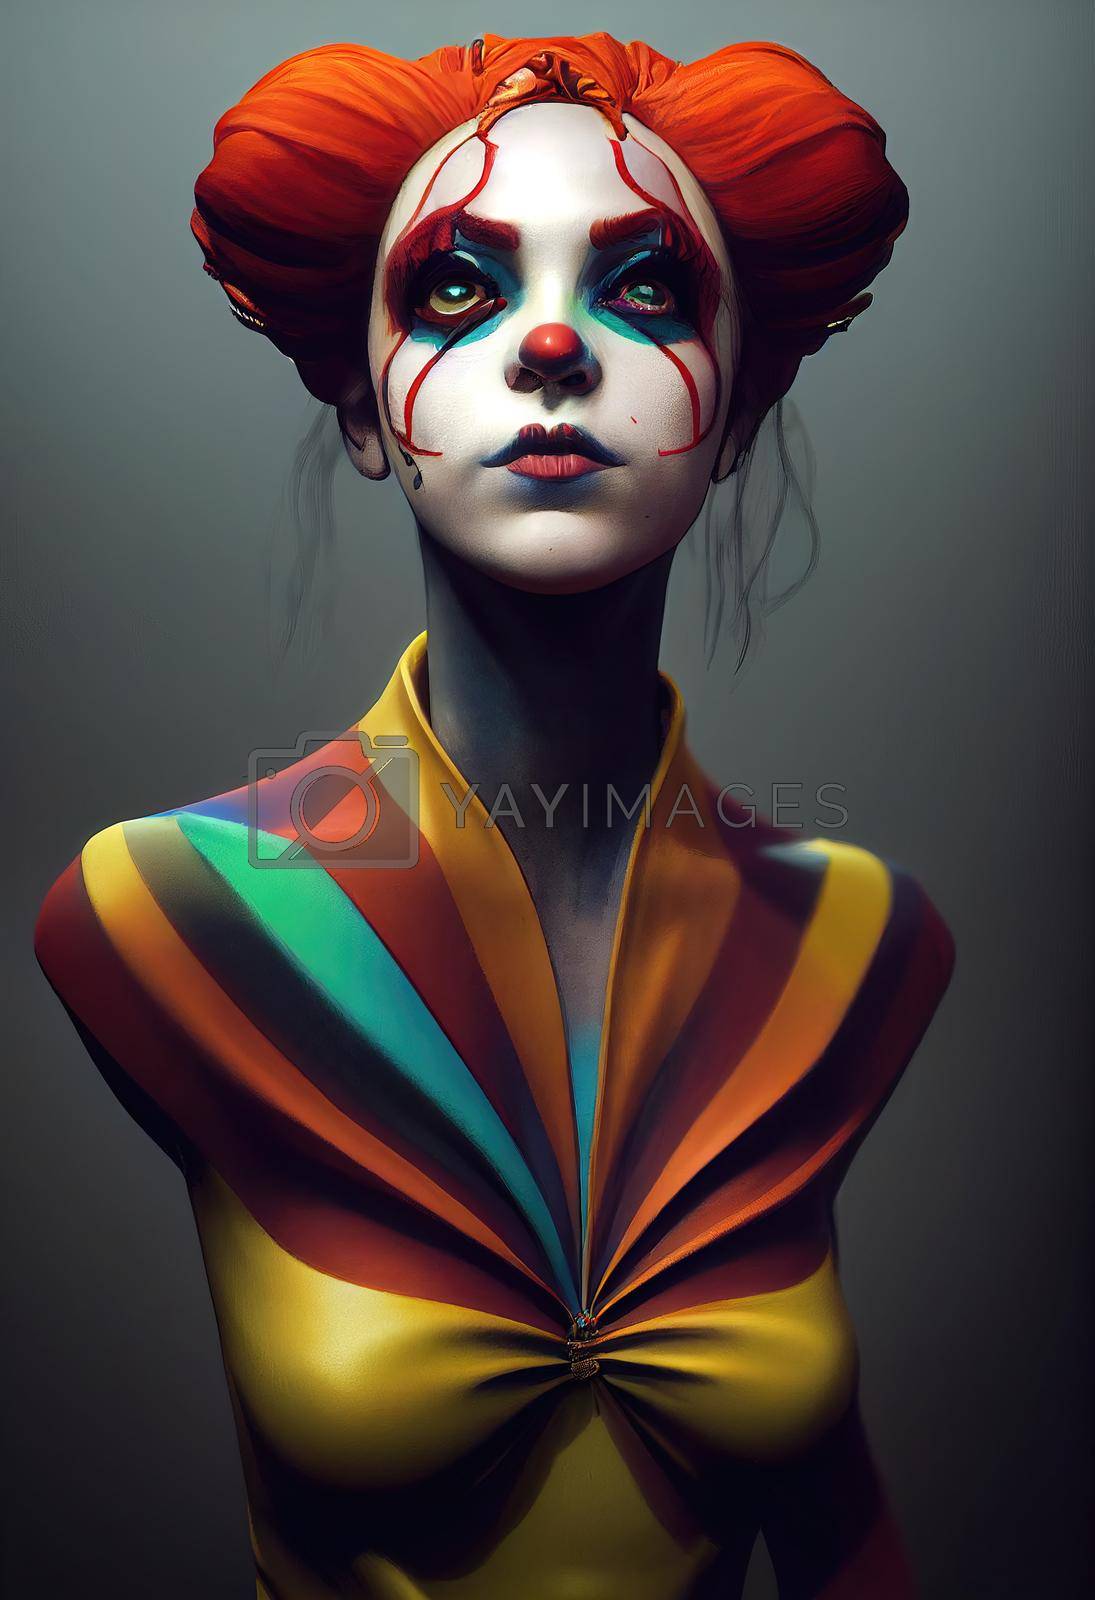 Royalty free image of Portrait of a beautiful clown girl, 3d render by Farcas